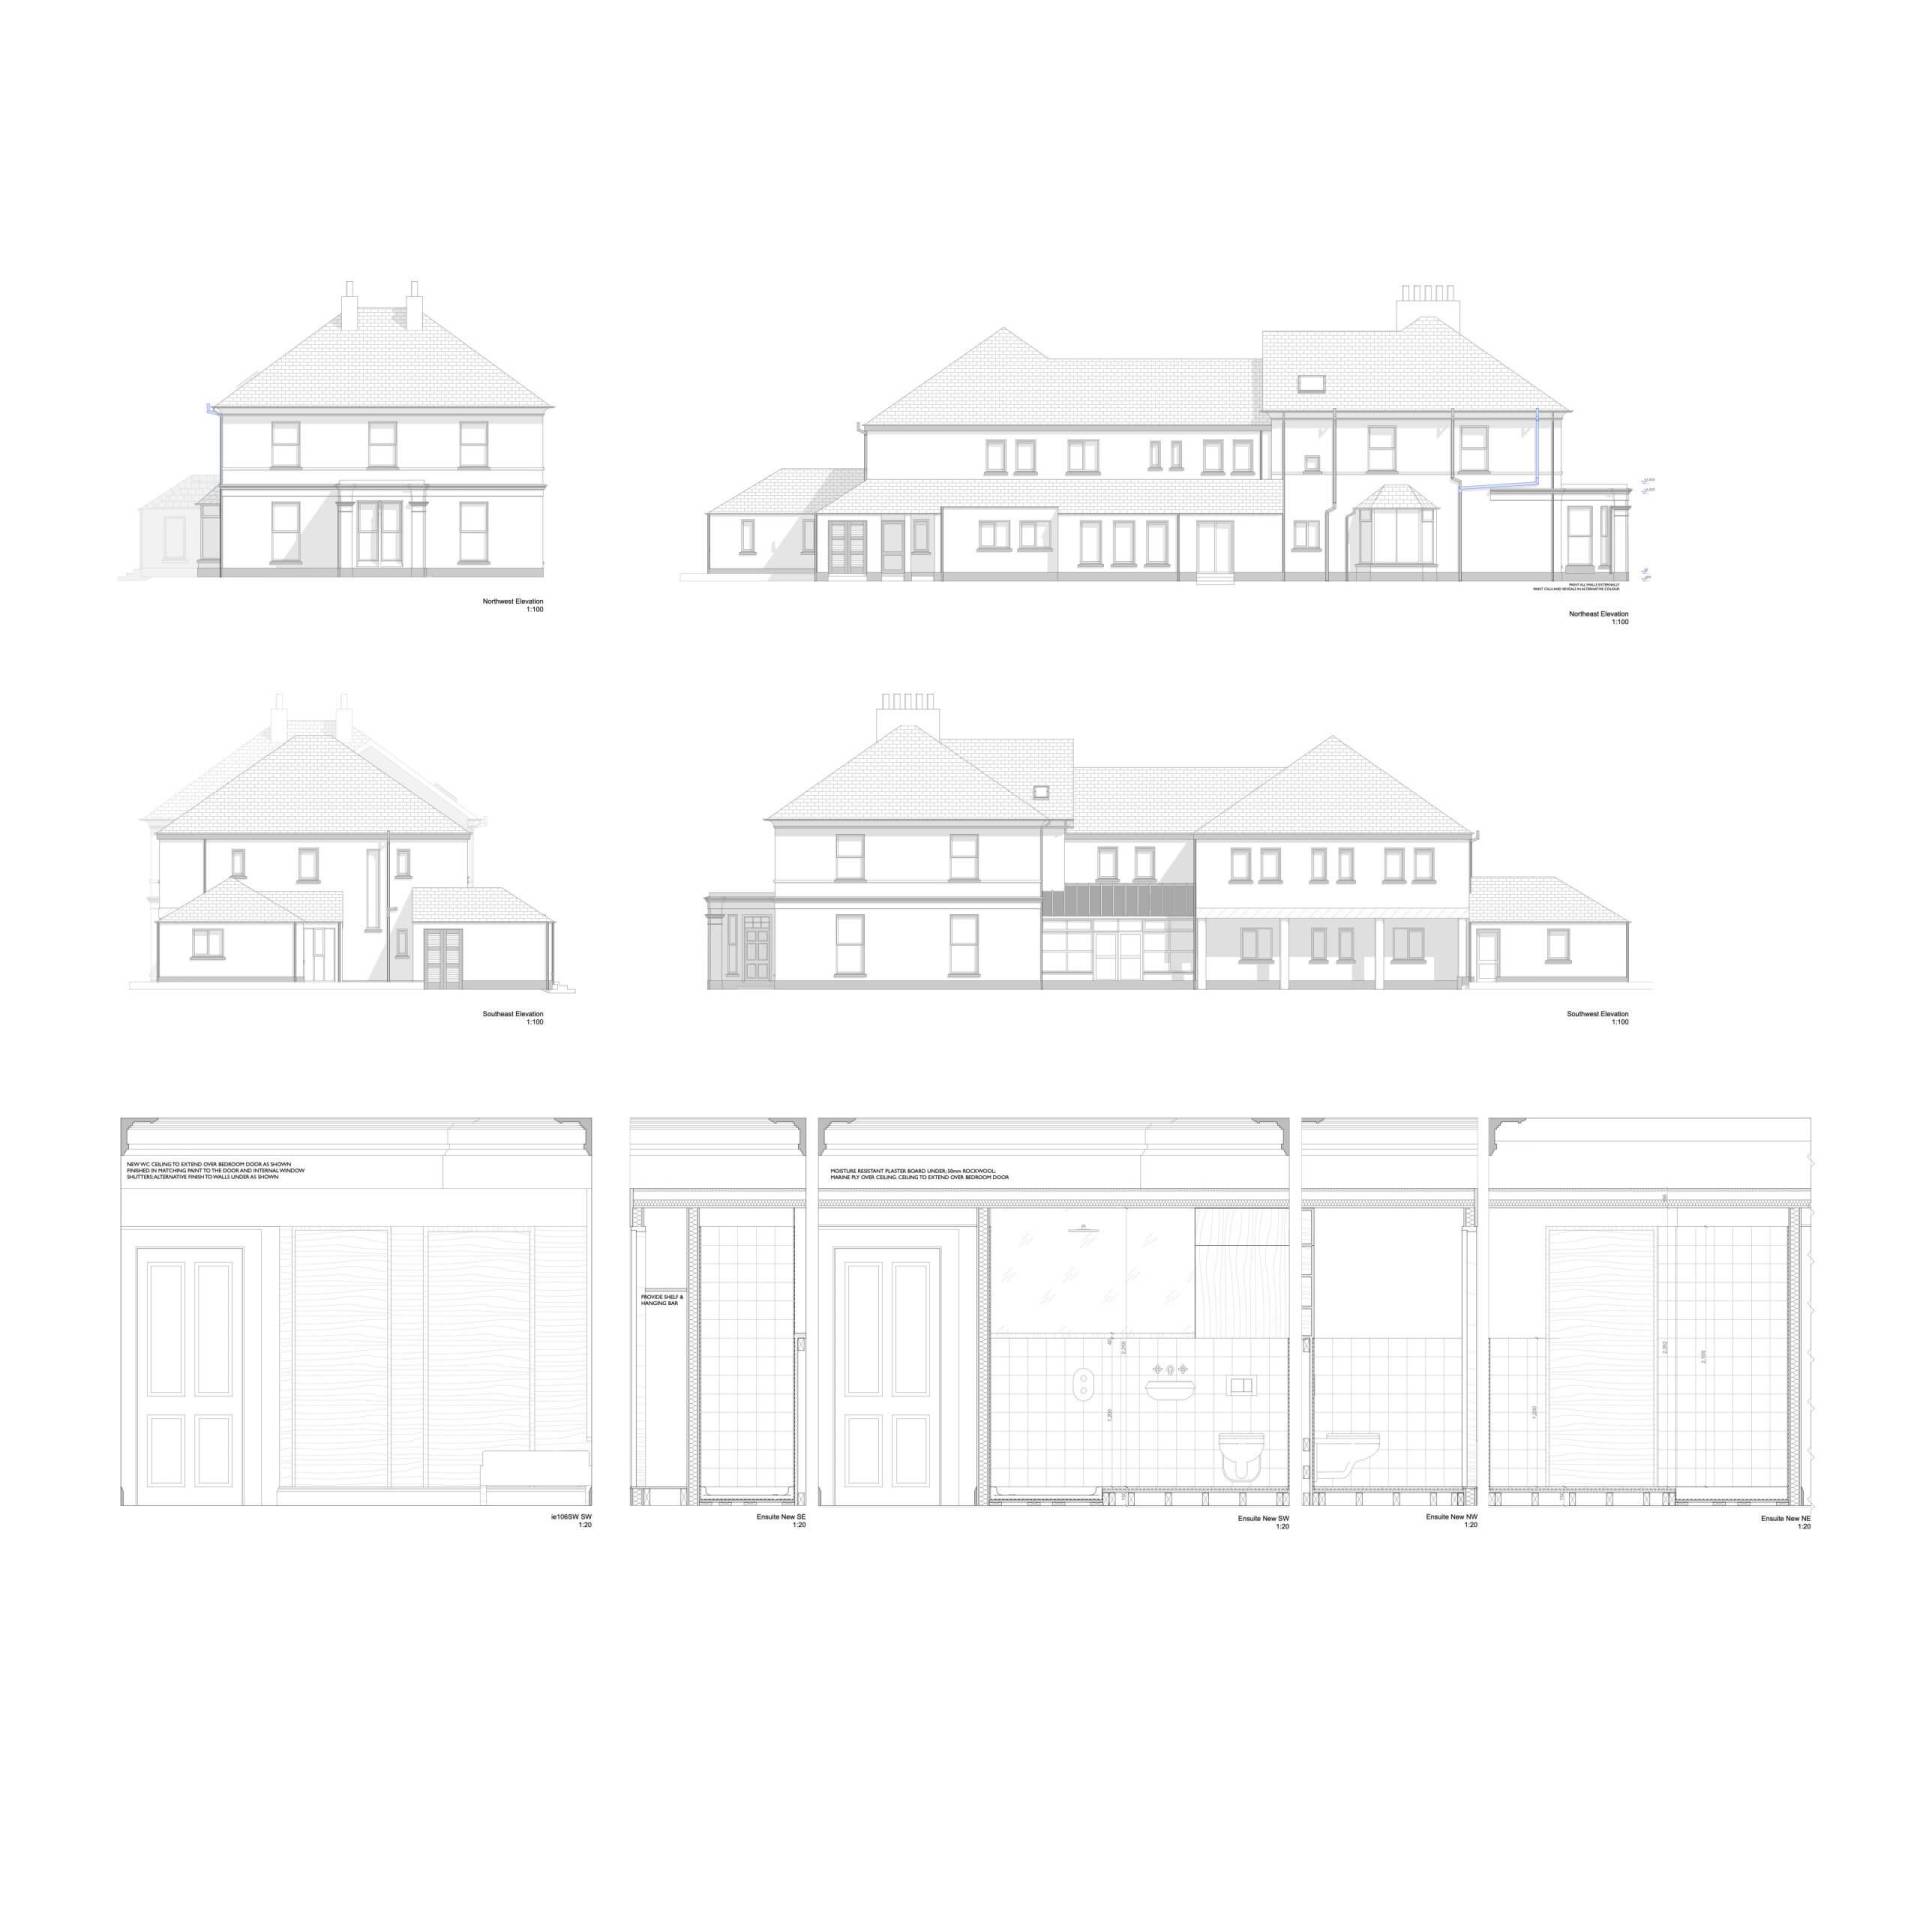 Steve Larkin Architects - Cahir 04 1411 es01 RESIDENTIAL ELEVATION and NEW WC 